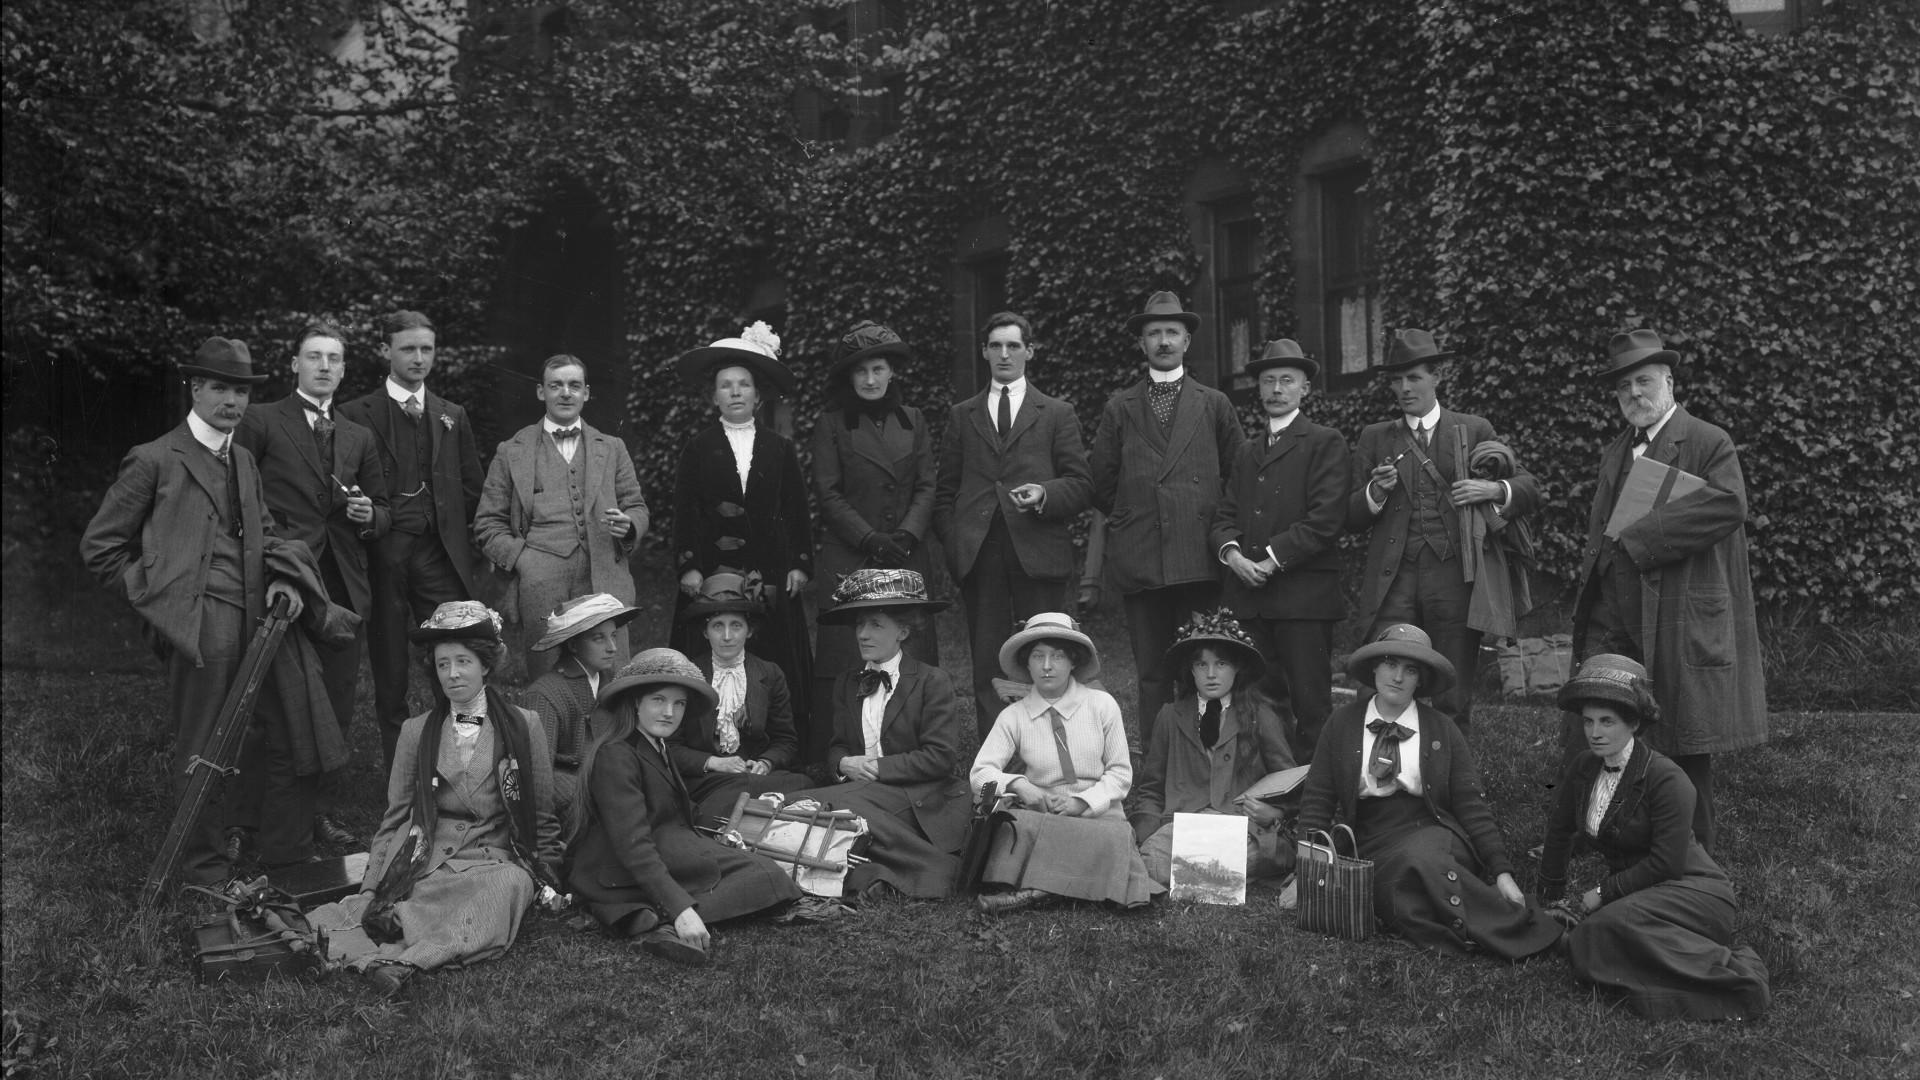 Middle class men and women posing for photograph on a lawn